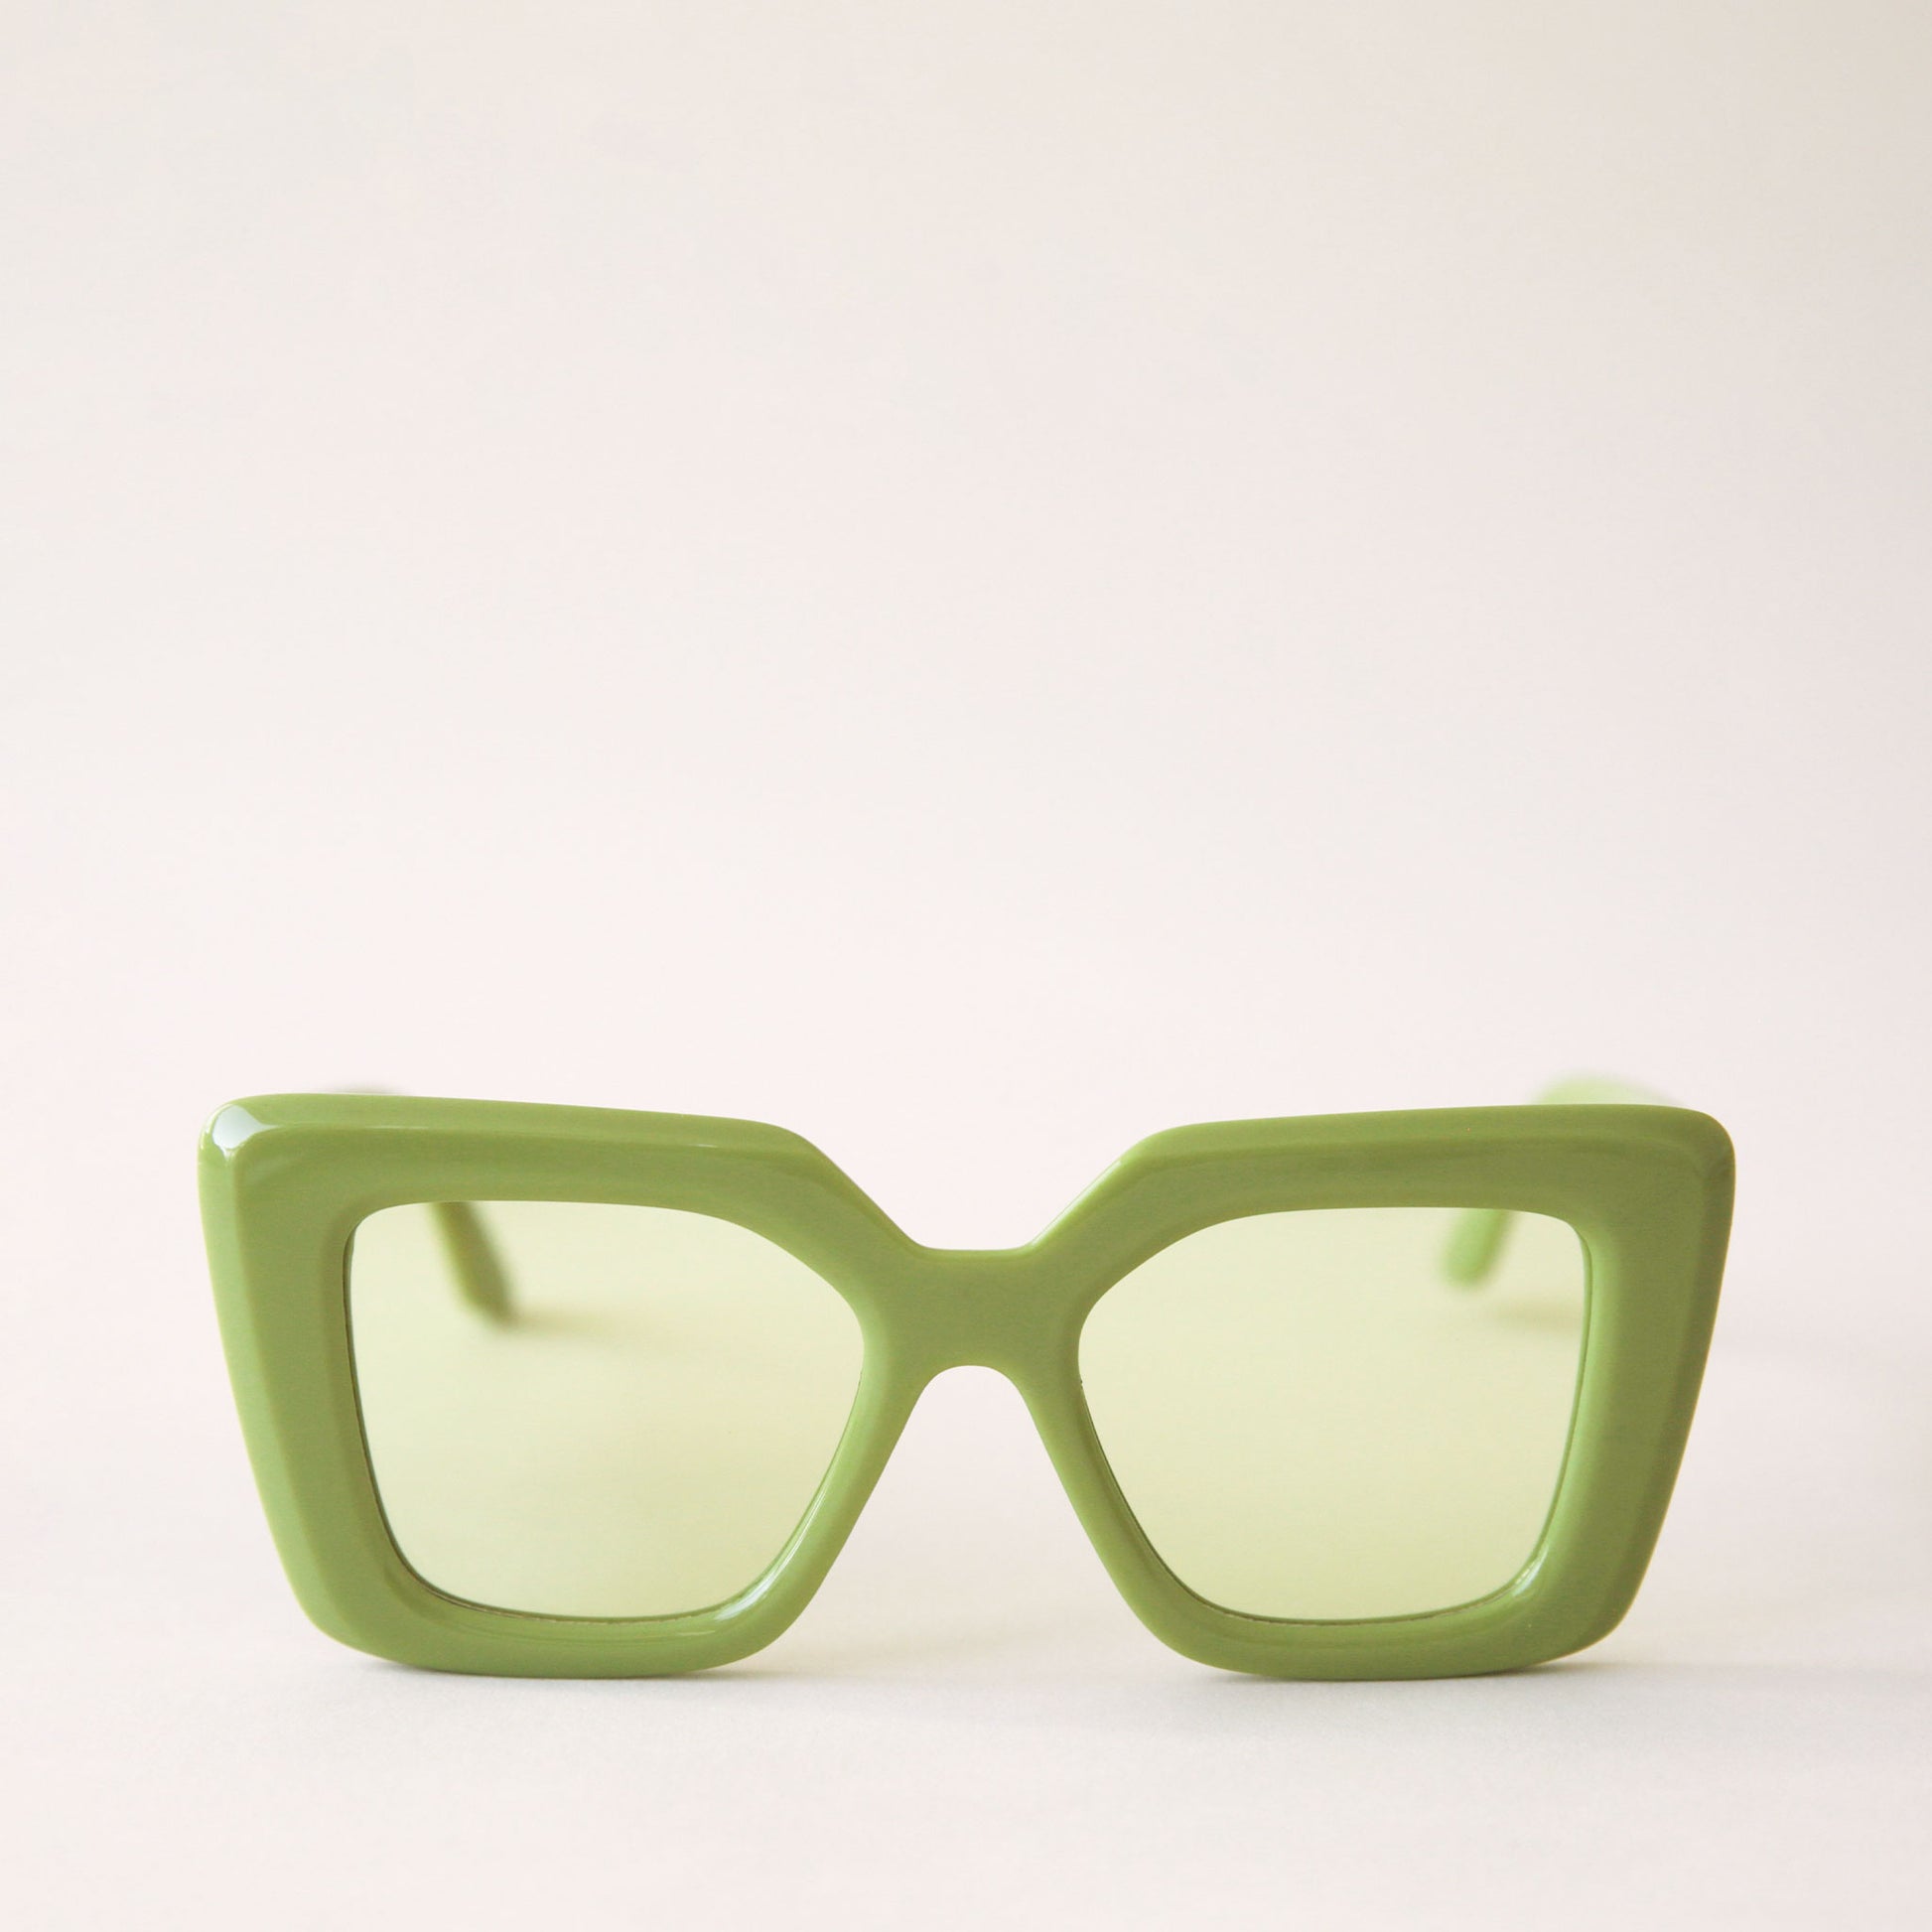 70's inspired sunglasses with a lime green, rectangle frame that has a slight cat eye point at the tops along with light green lenses.